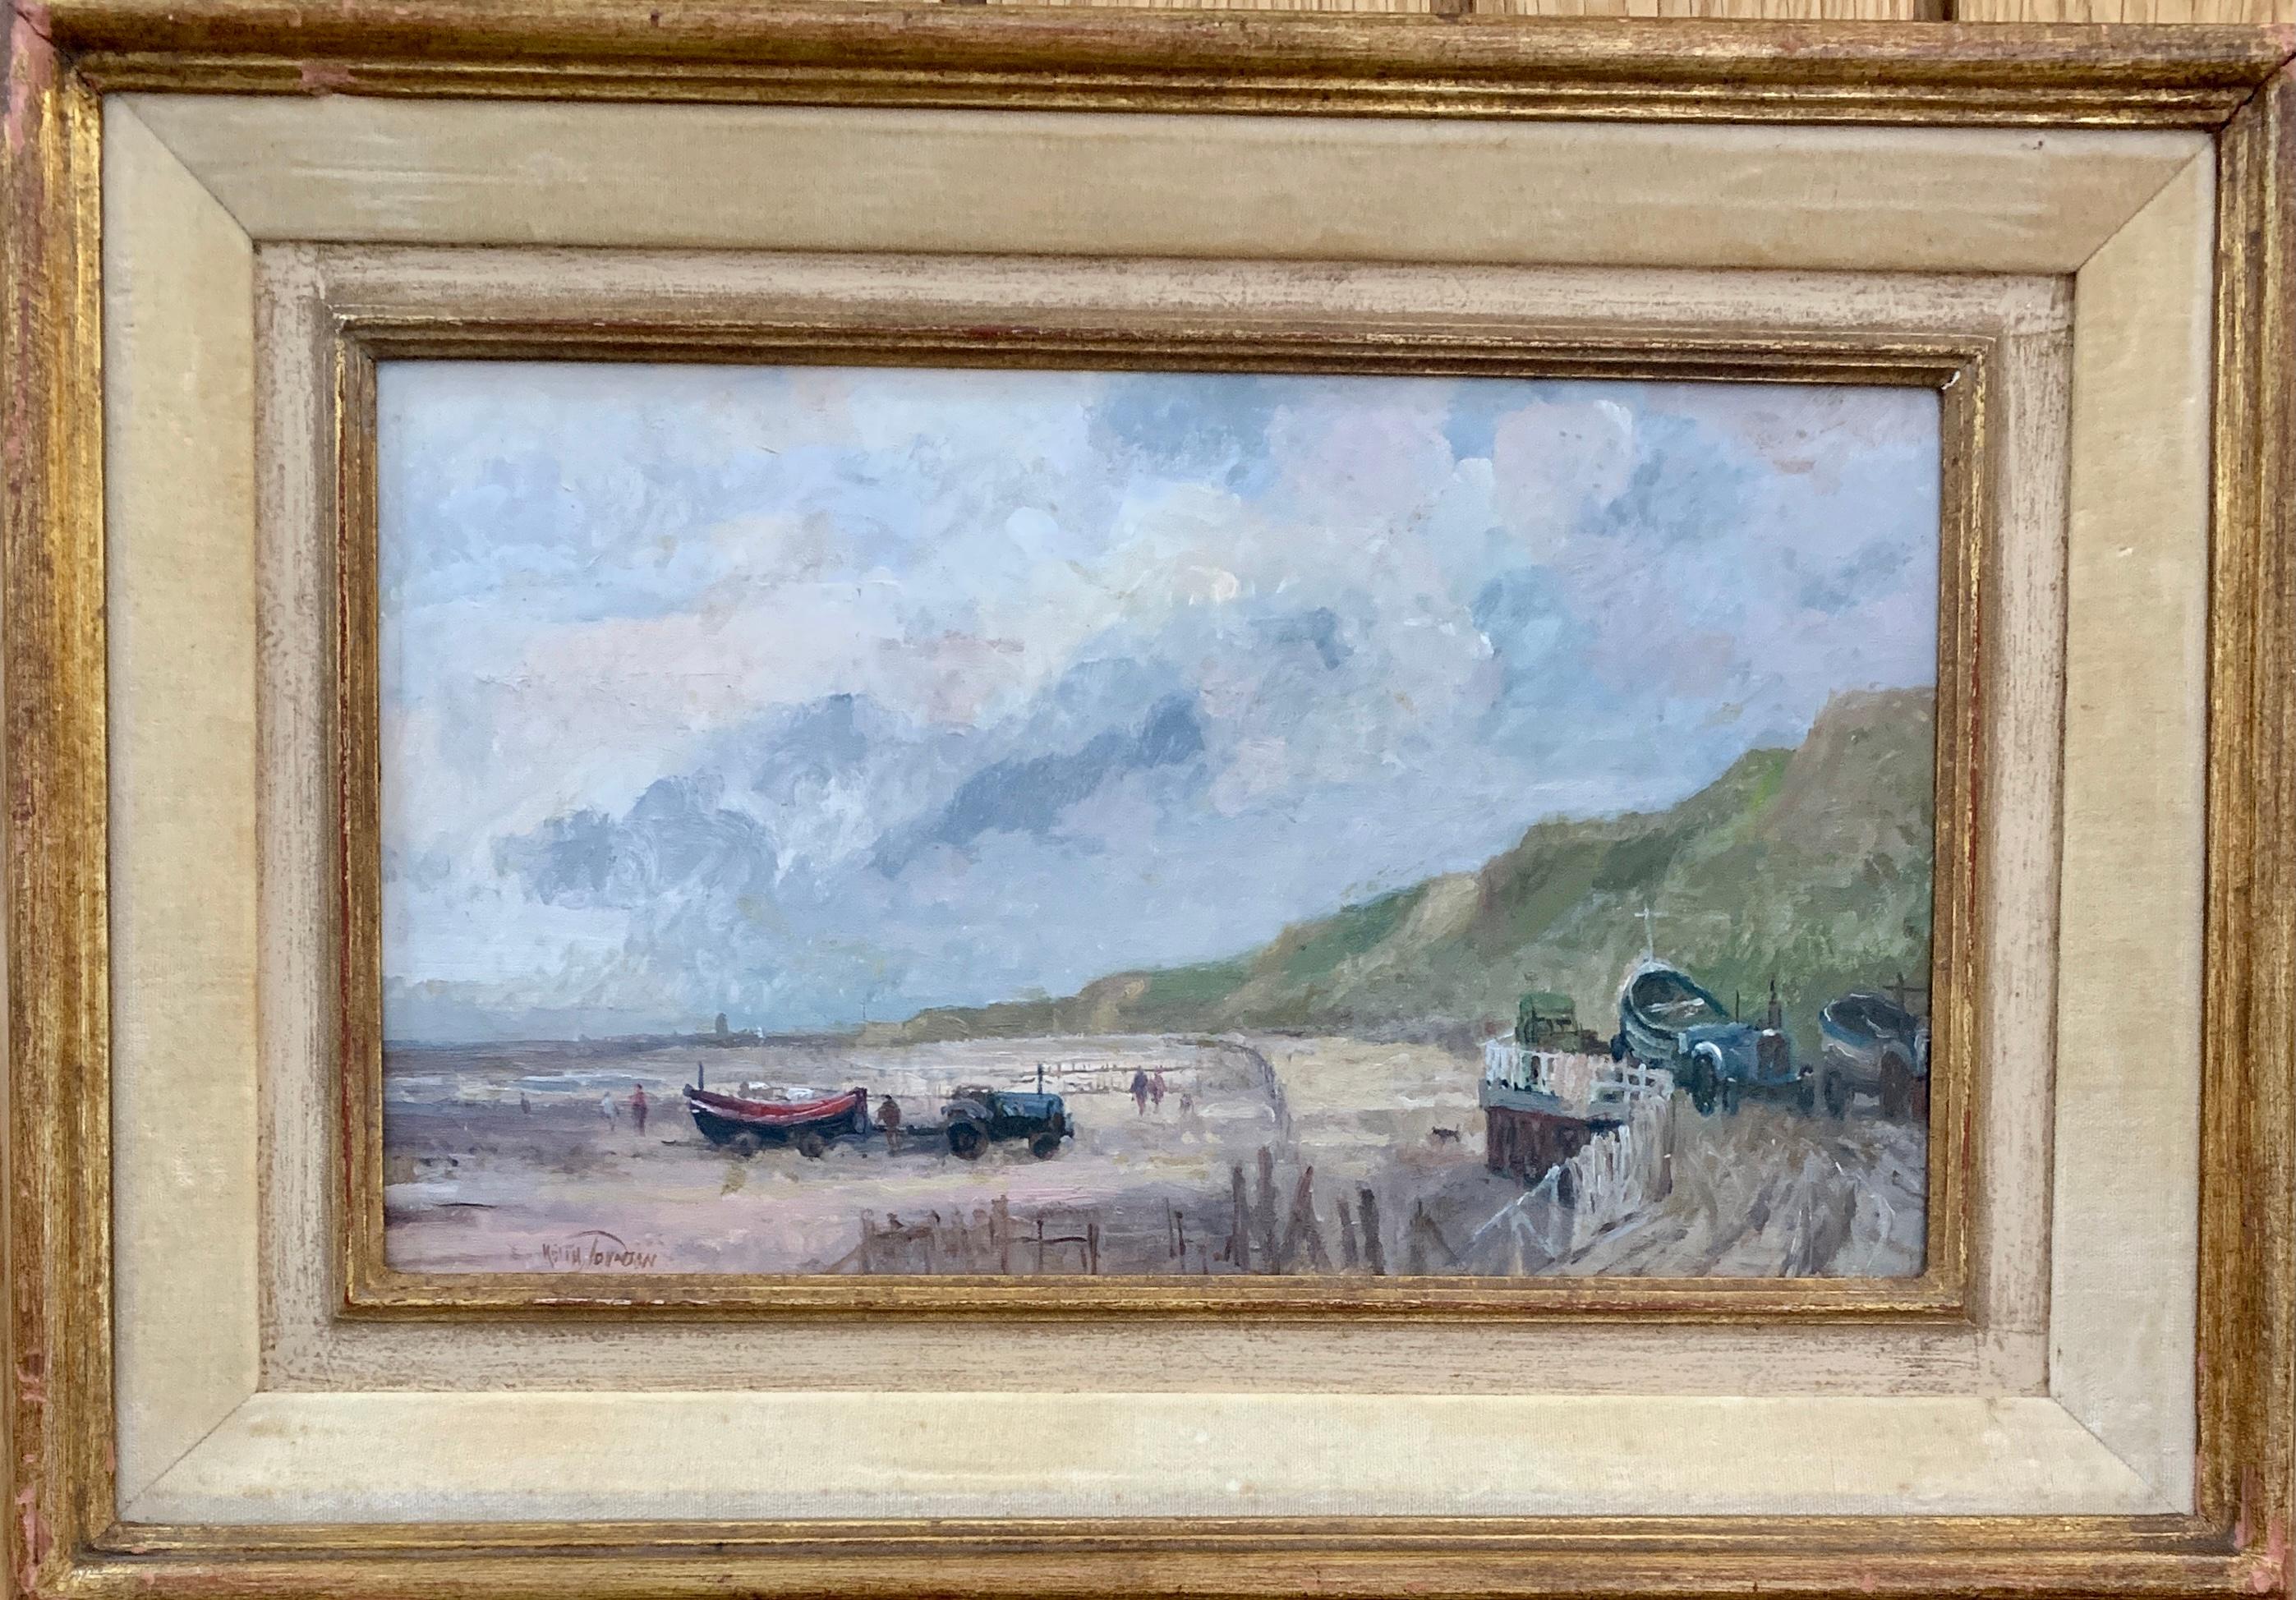 Keith Johnson Figurative Painting - English Impressionist 20th century beach scene with tractor, fishing boats.